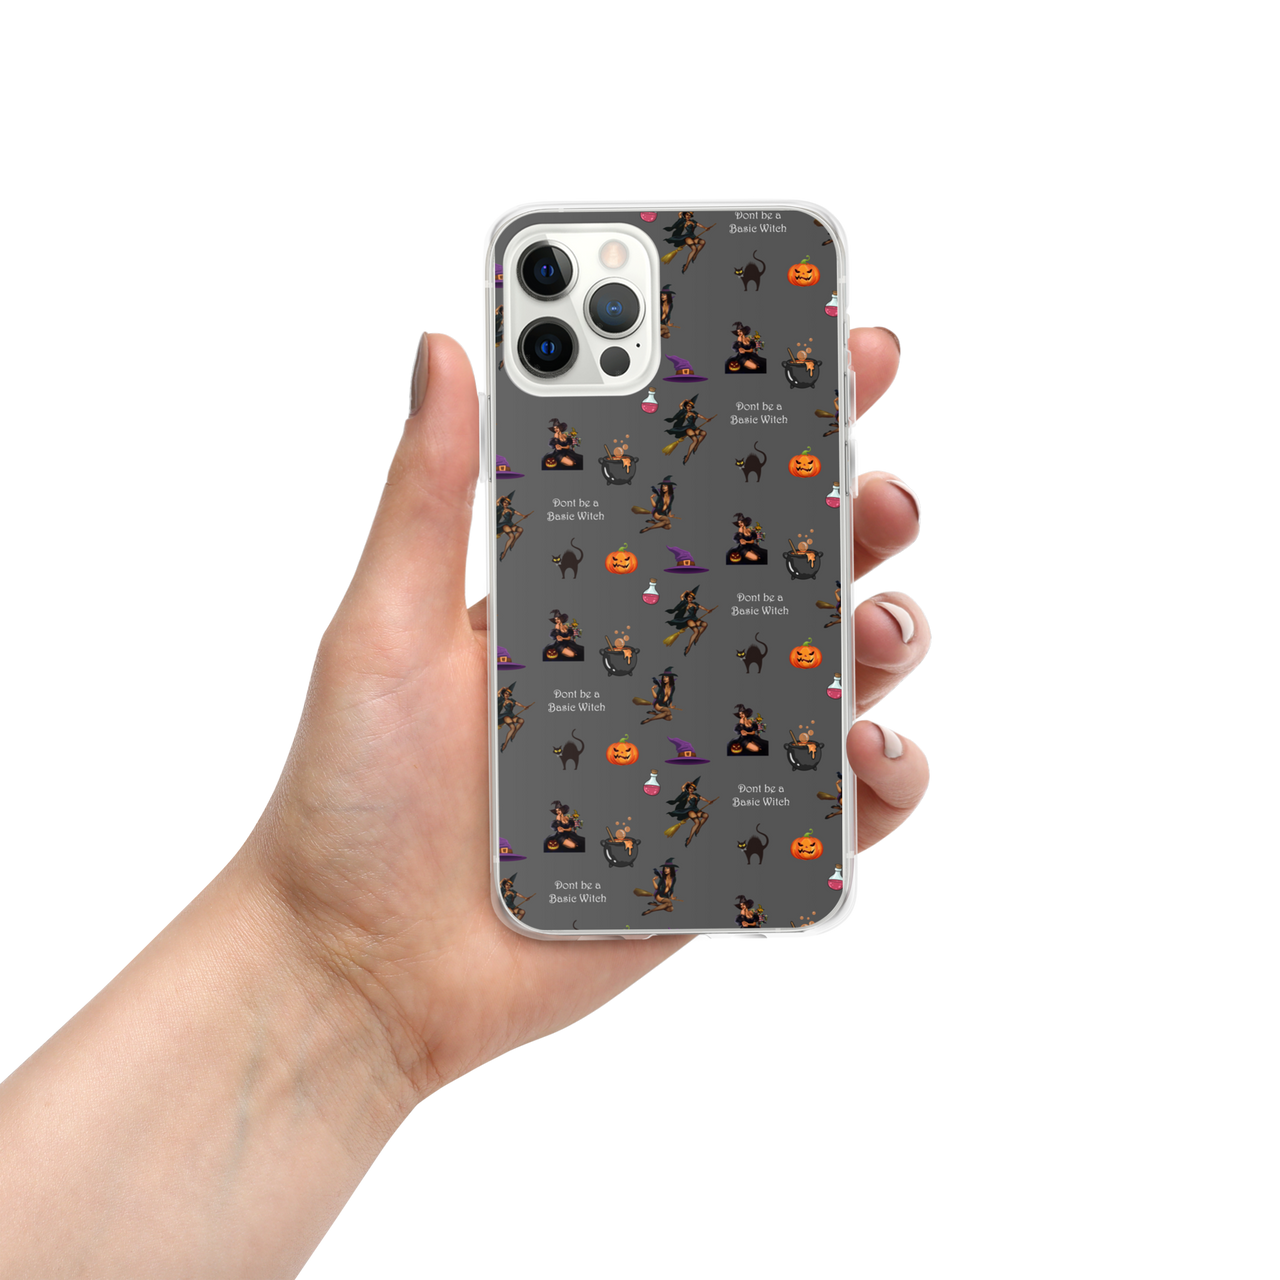 Halloween iPhone Case, Halloween All Over Print iPhone Case /Don't be a Basic Witch SHAVA